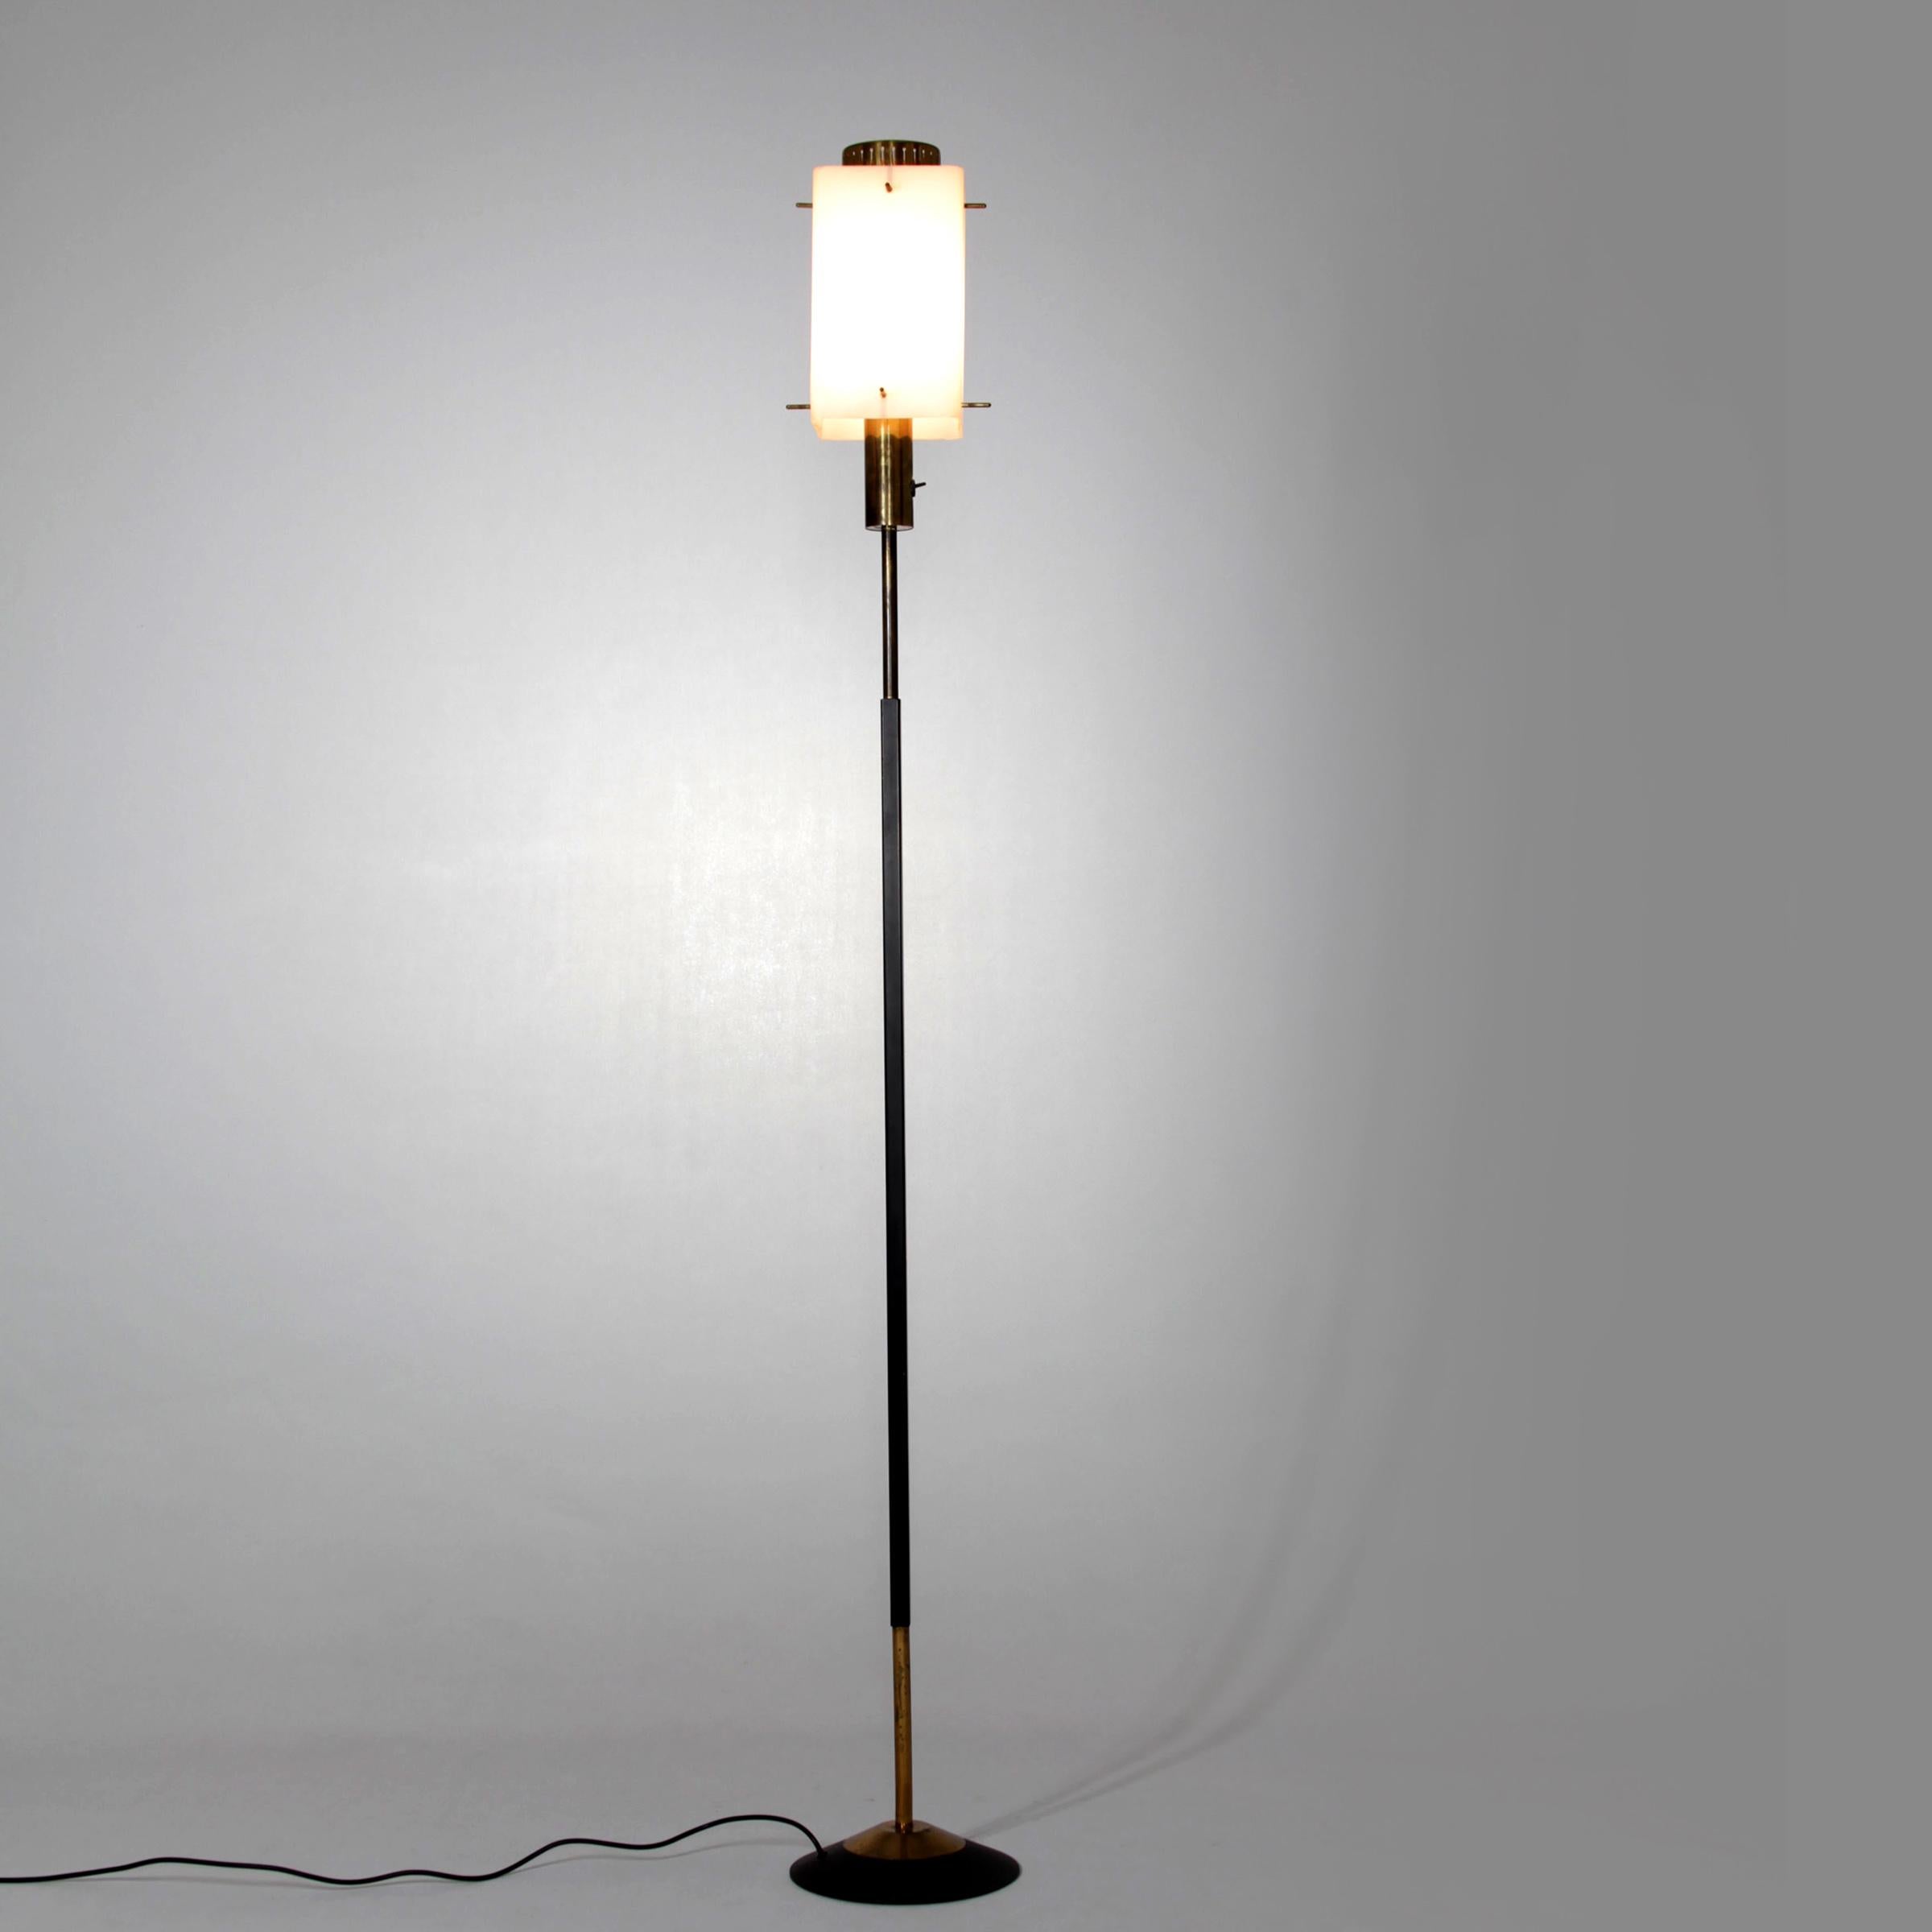 Rare italian 1950s Stilnovo floor lamp. The lamp is characterized by an opaline glass shade, lacquered frame, and brass elements.
Shade 15 x 15x 25 cm